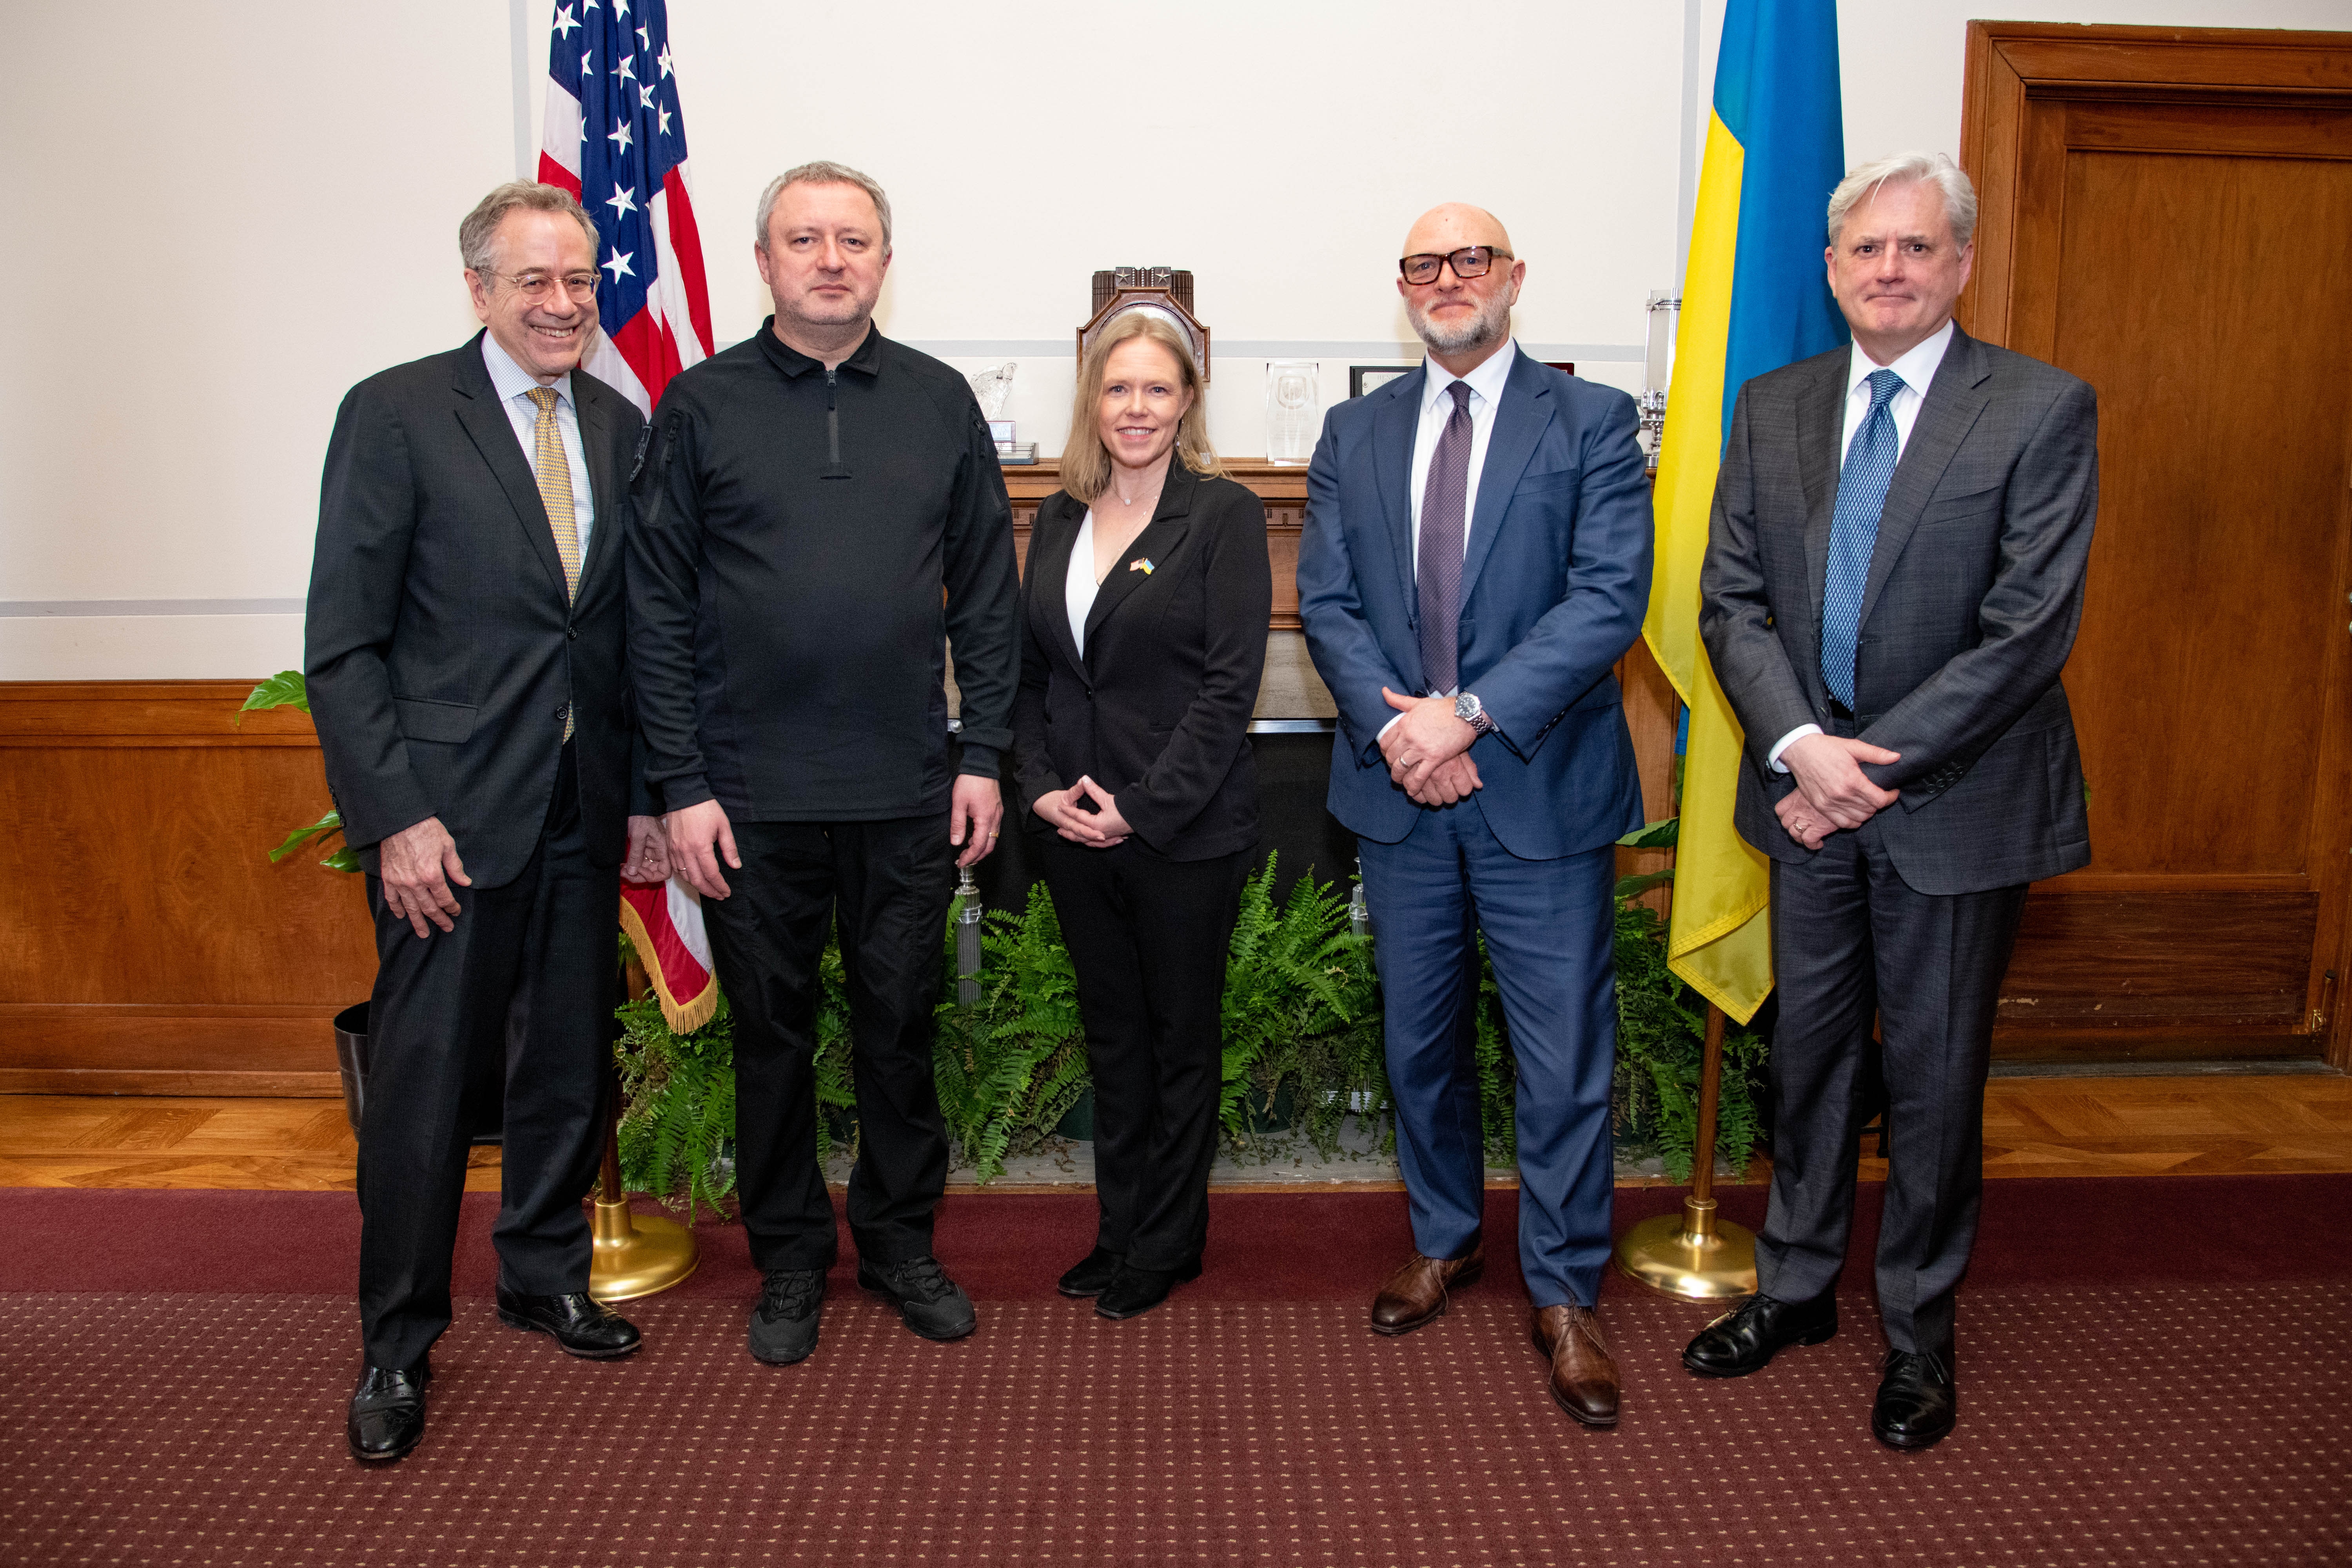 From left to right: DAAG Swartz, PG Kostin, WarCAT Director Christian Levesque, OPDAT Resident Legal Advisor at U.S. Embassy Kyiv Kimball, and Deputy Chief Joseph Poux of ENRD’s Environmental Crimes Section.